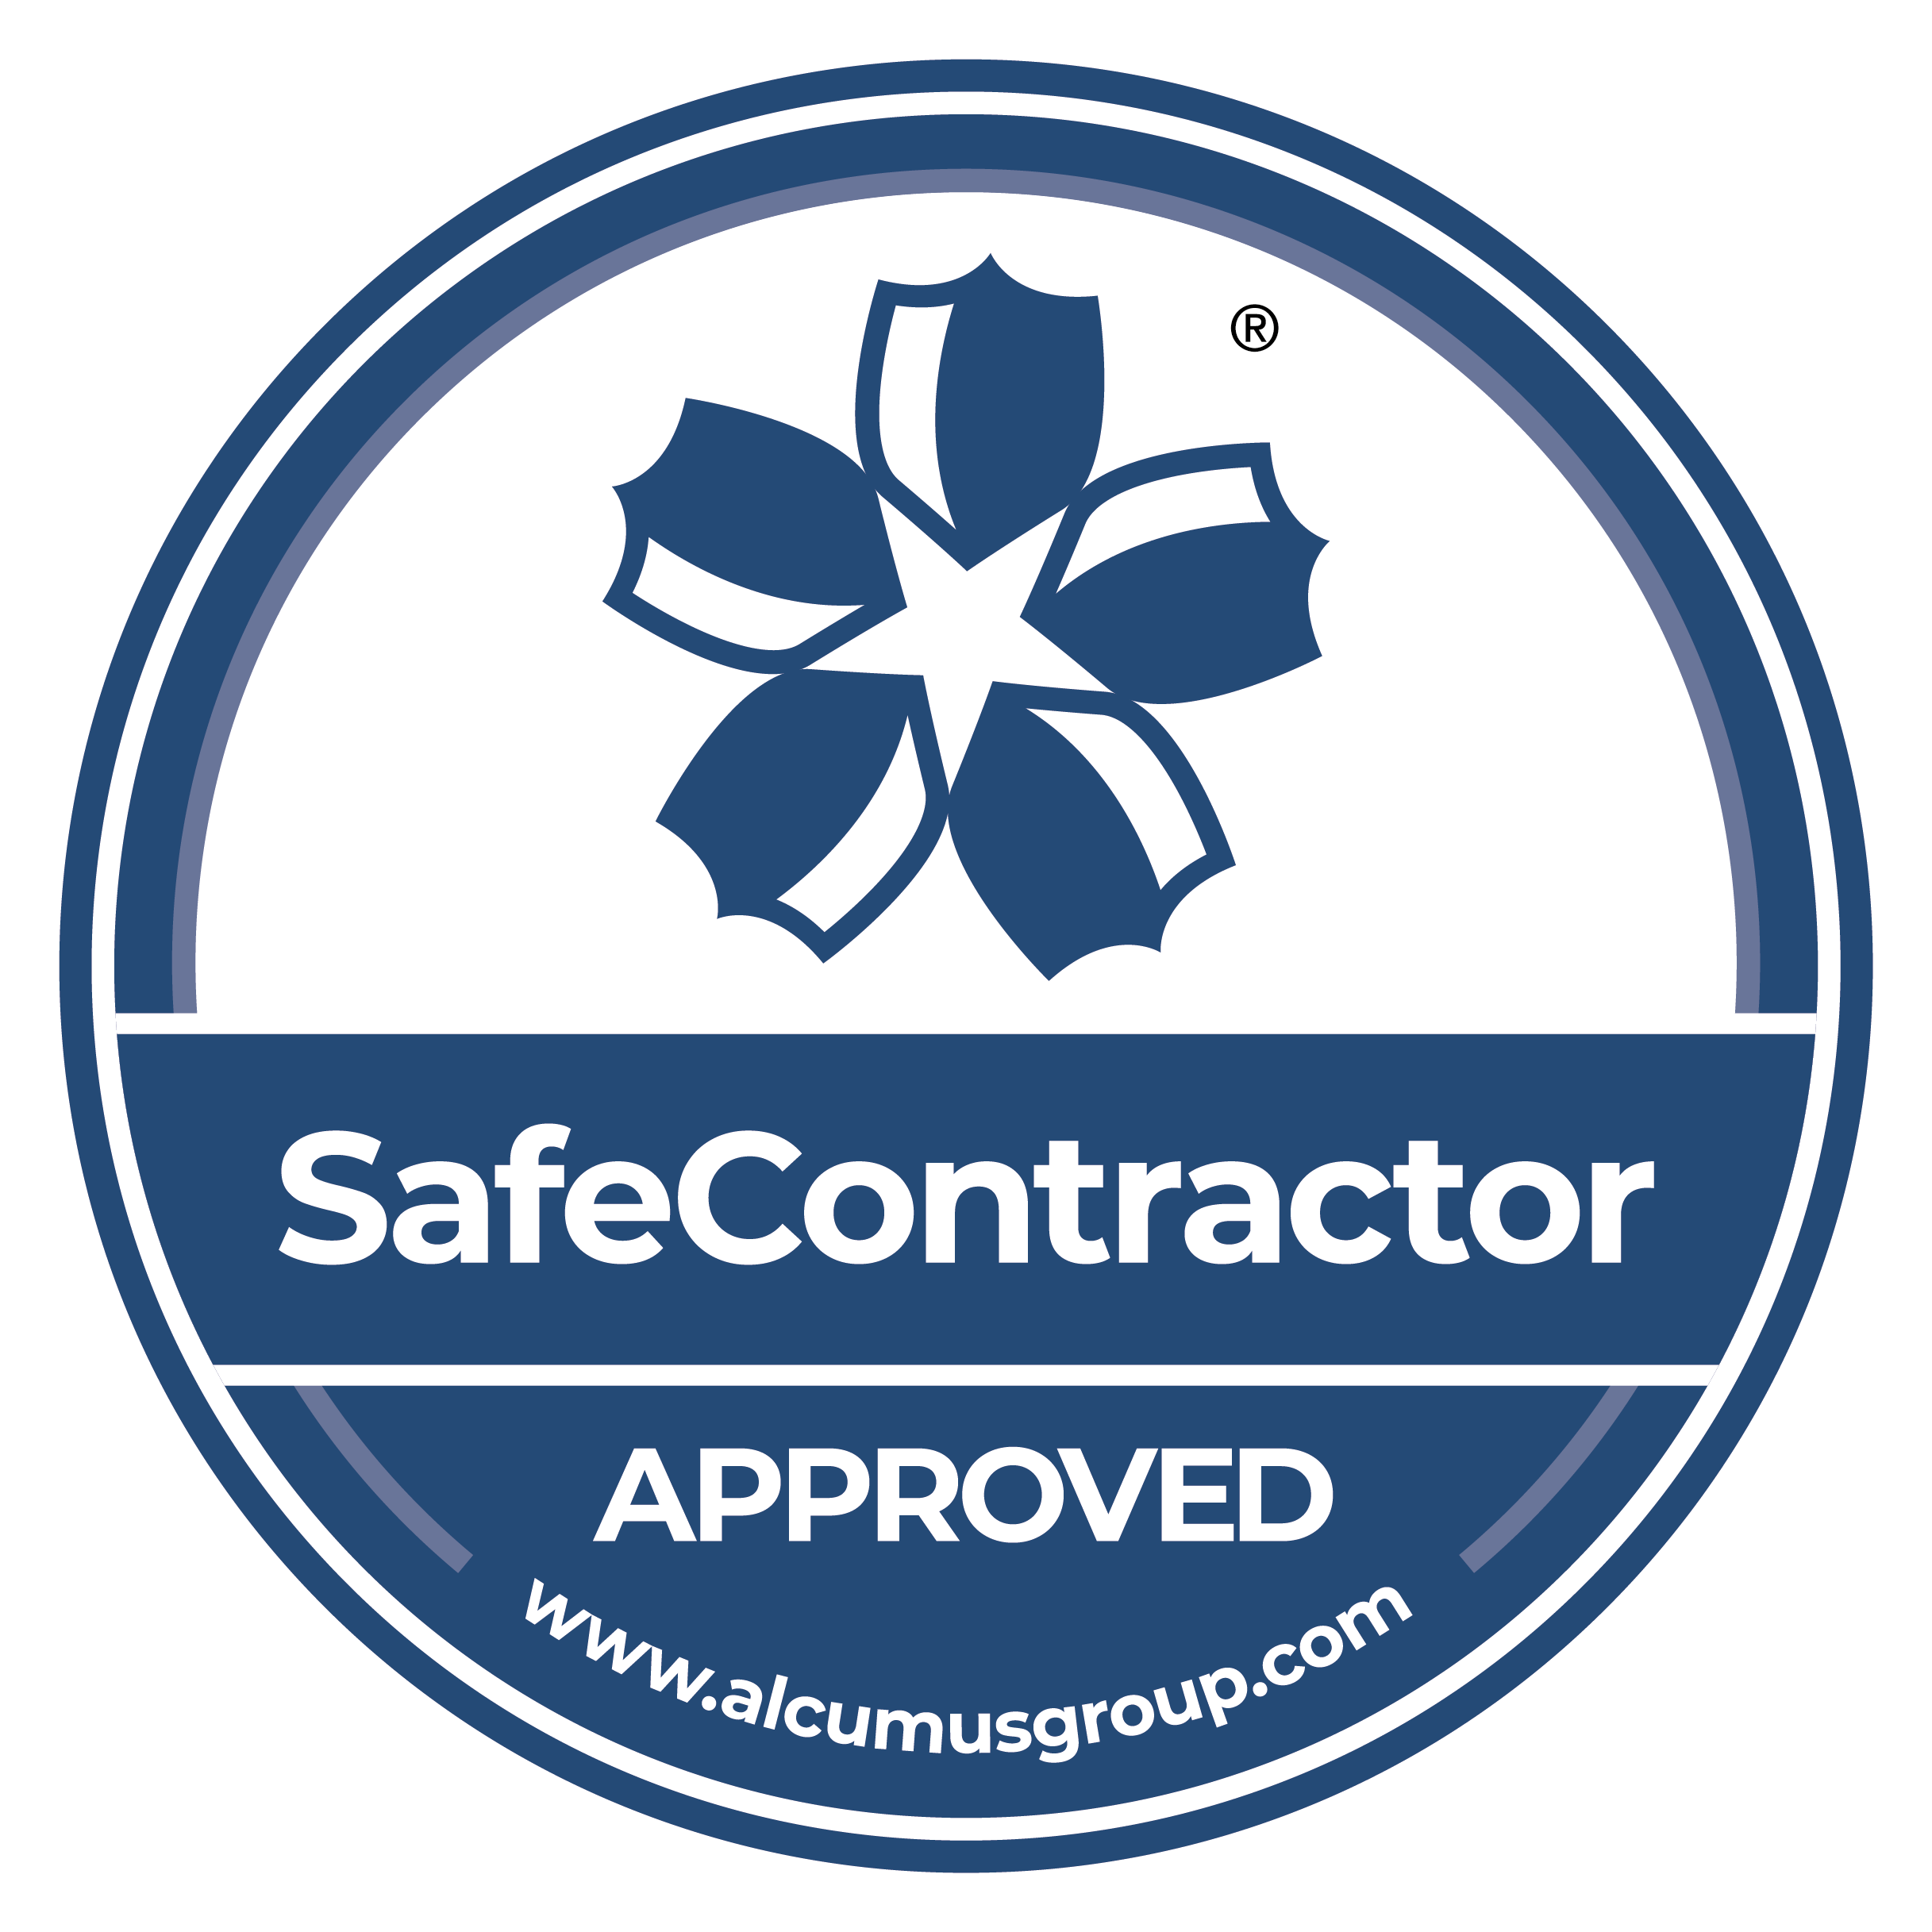 Alcumus Safe Contractor logo for health and safety in the workplace